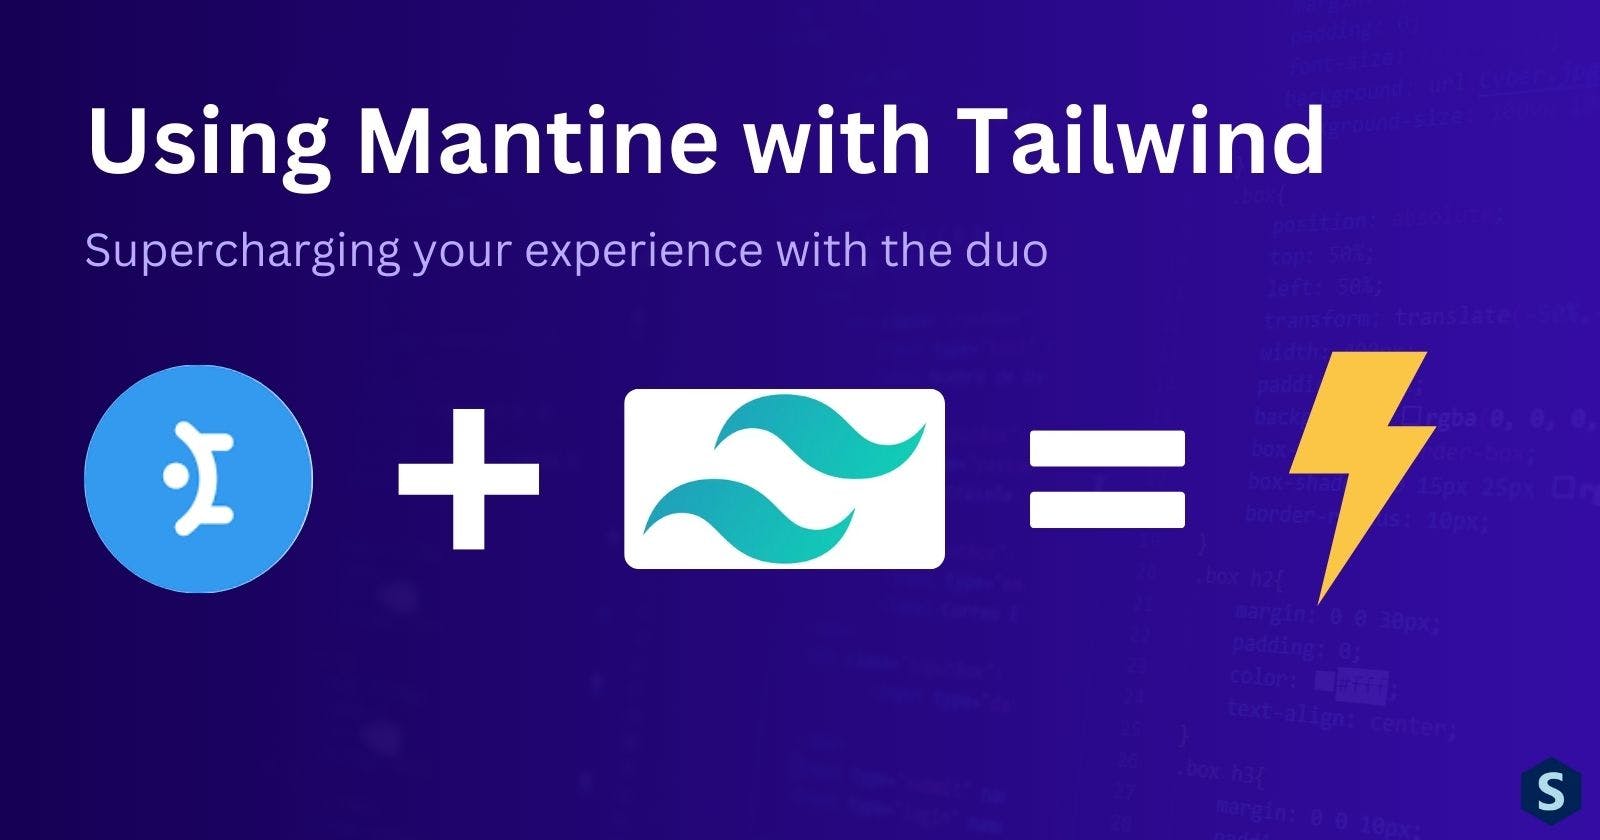 Using Mantine with Tailwind